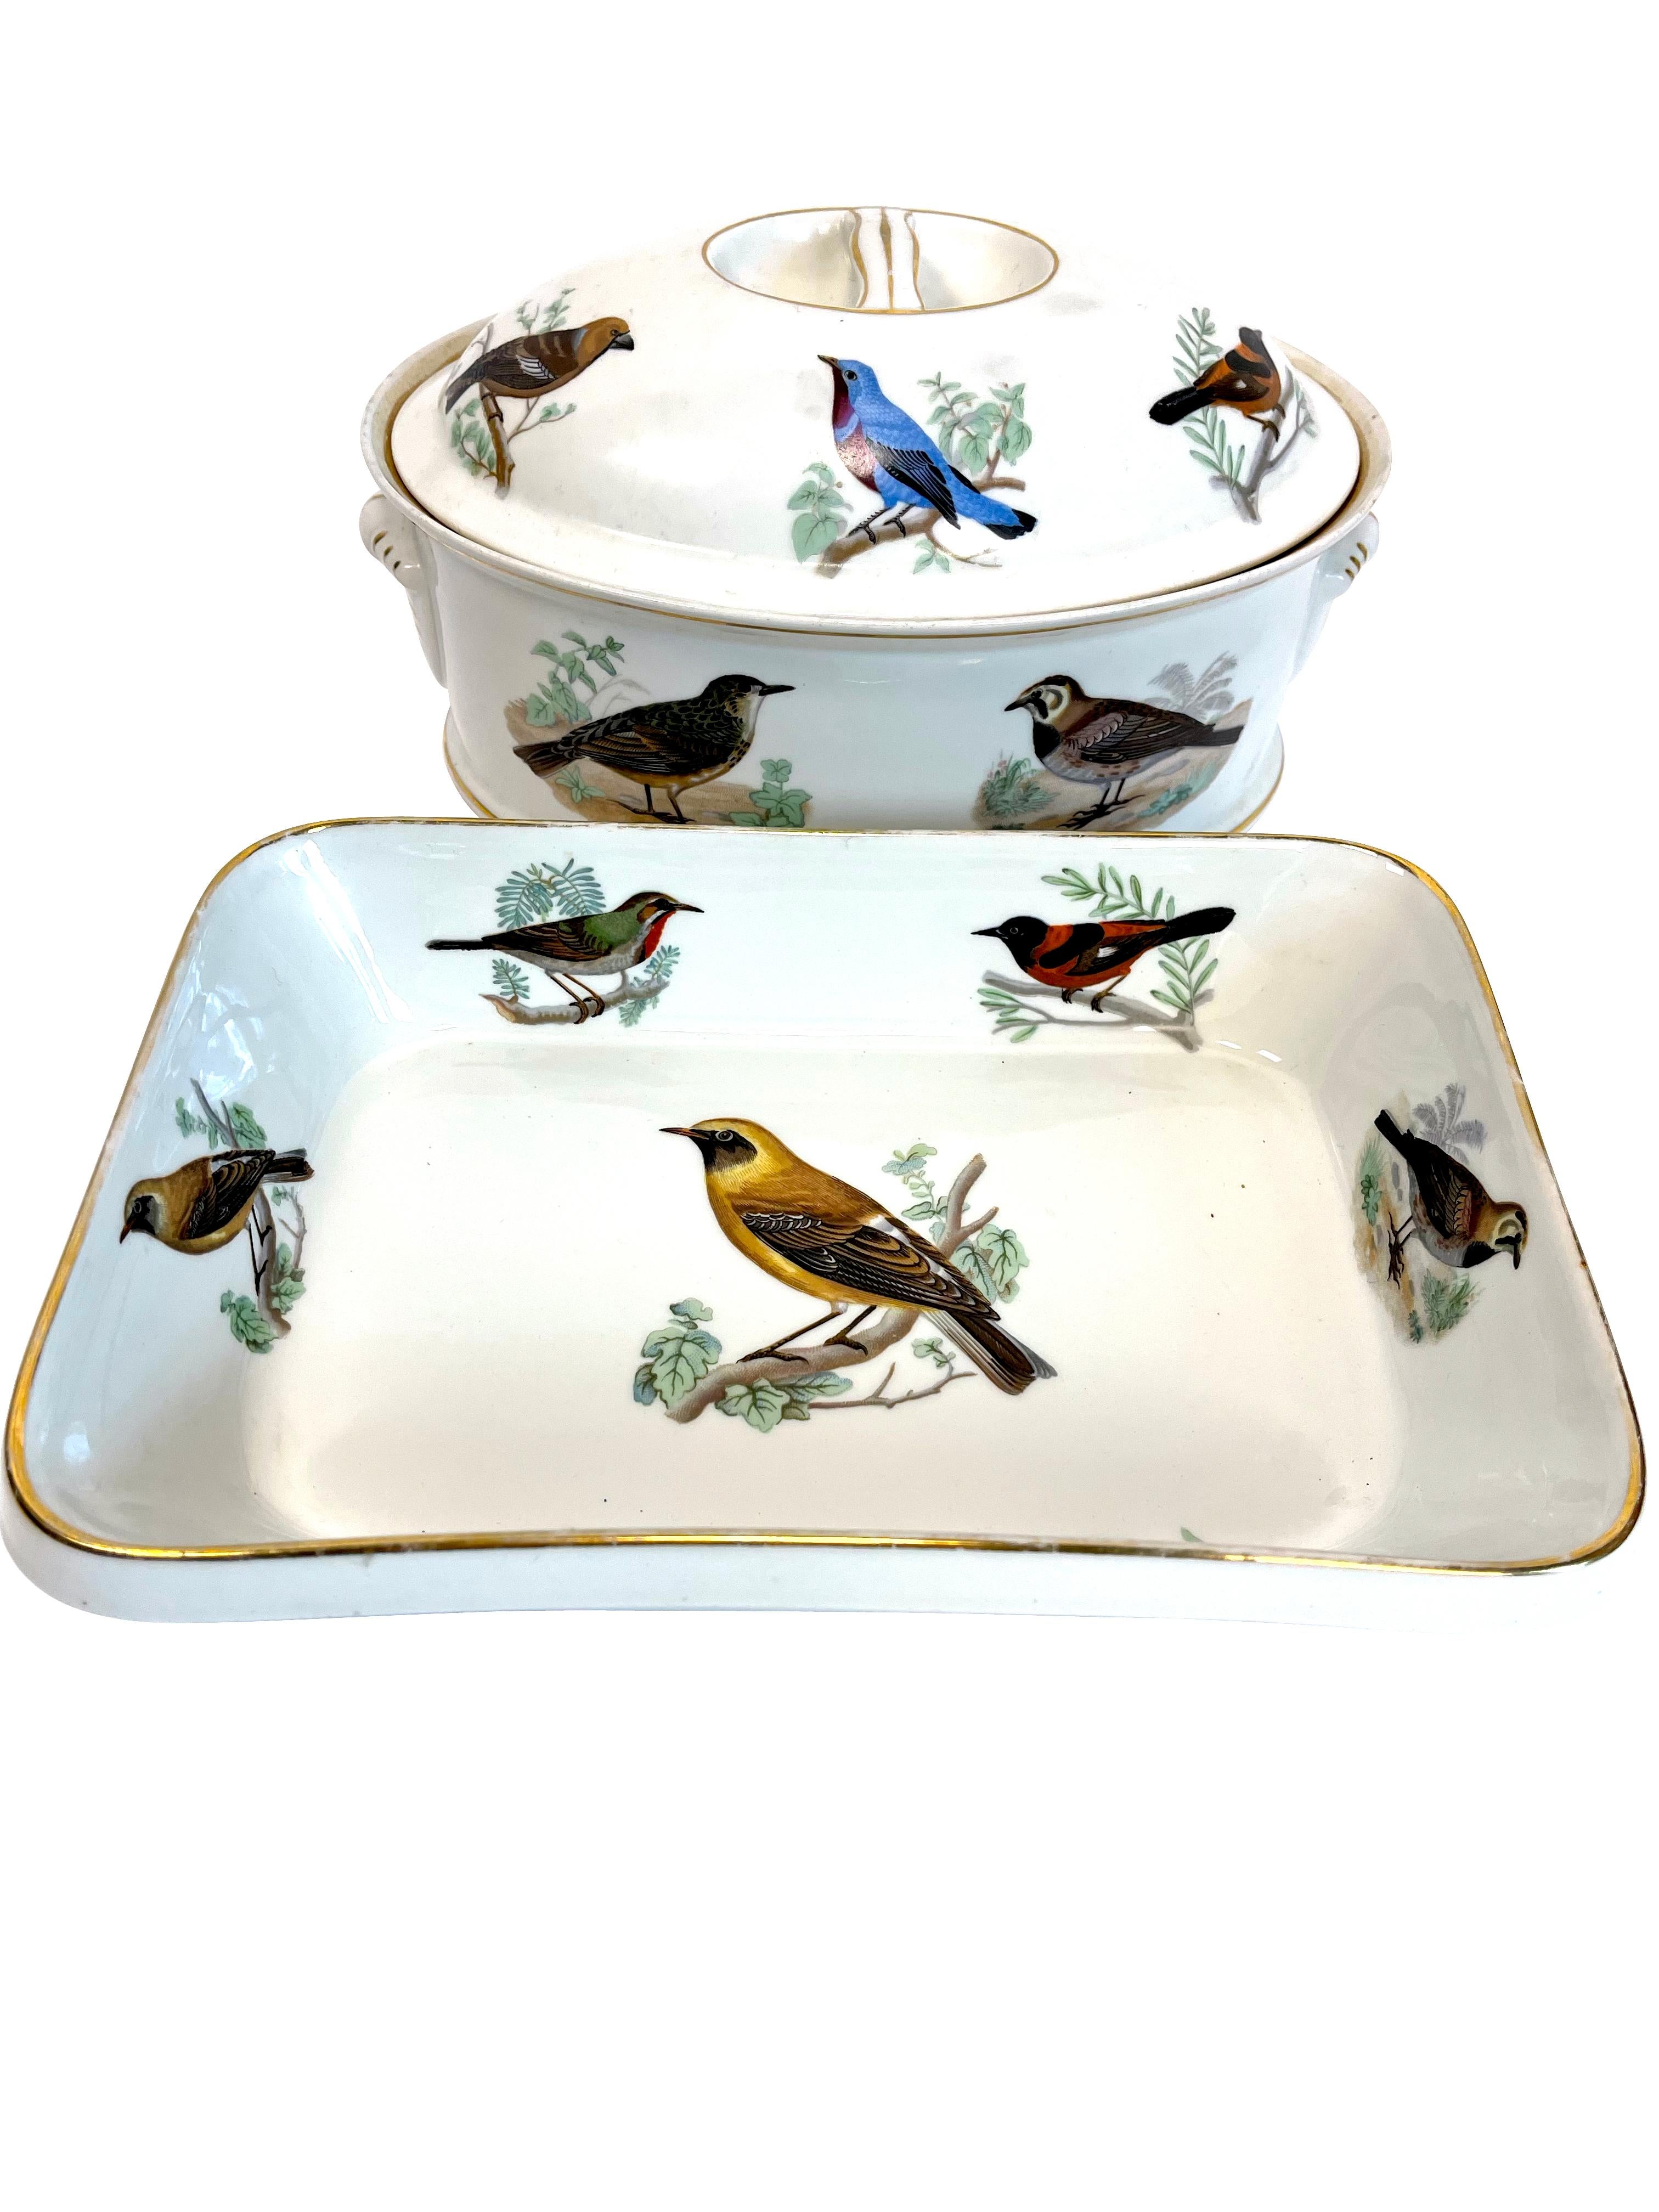 French porcelain serving pieces group of four with bird decoration- oval casserole, petit round casserole, and two rectangular baking dishes. All ovenproof with various bird designs.